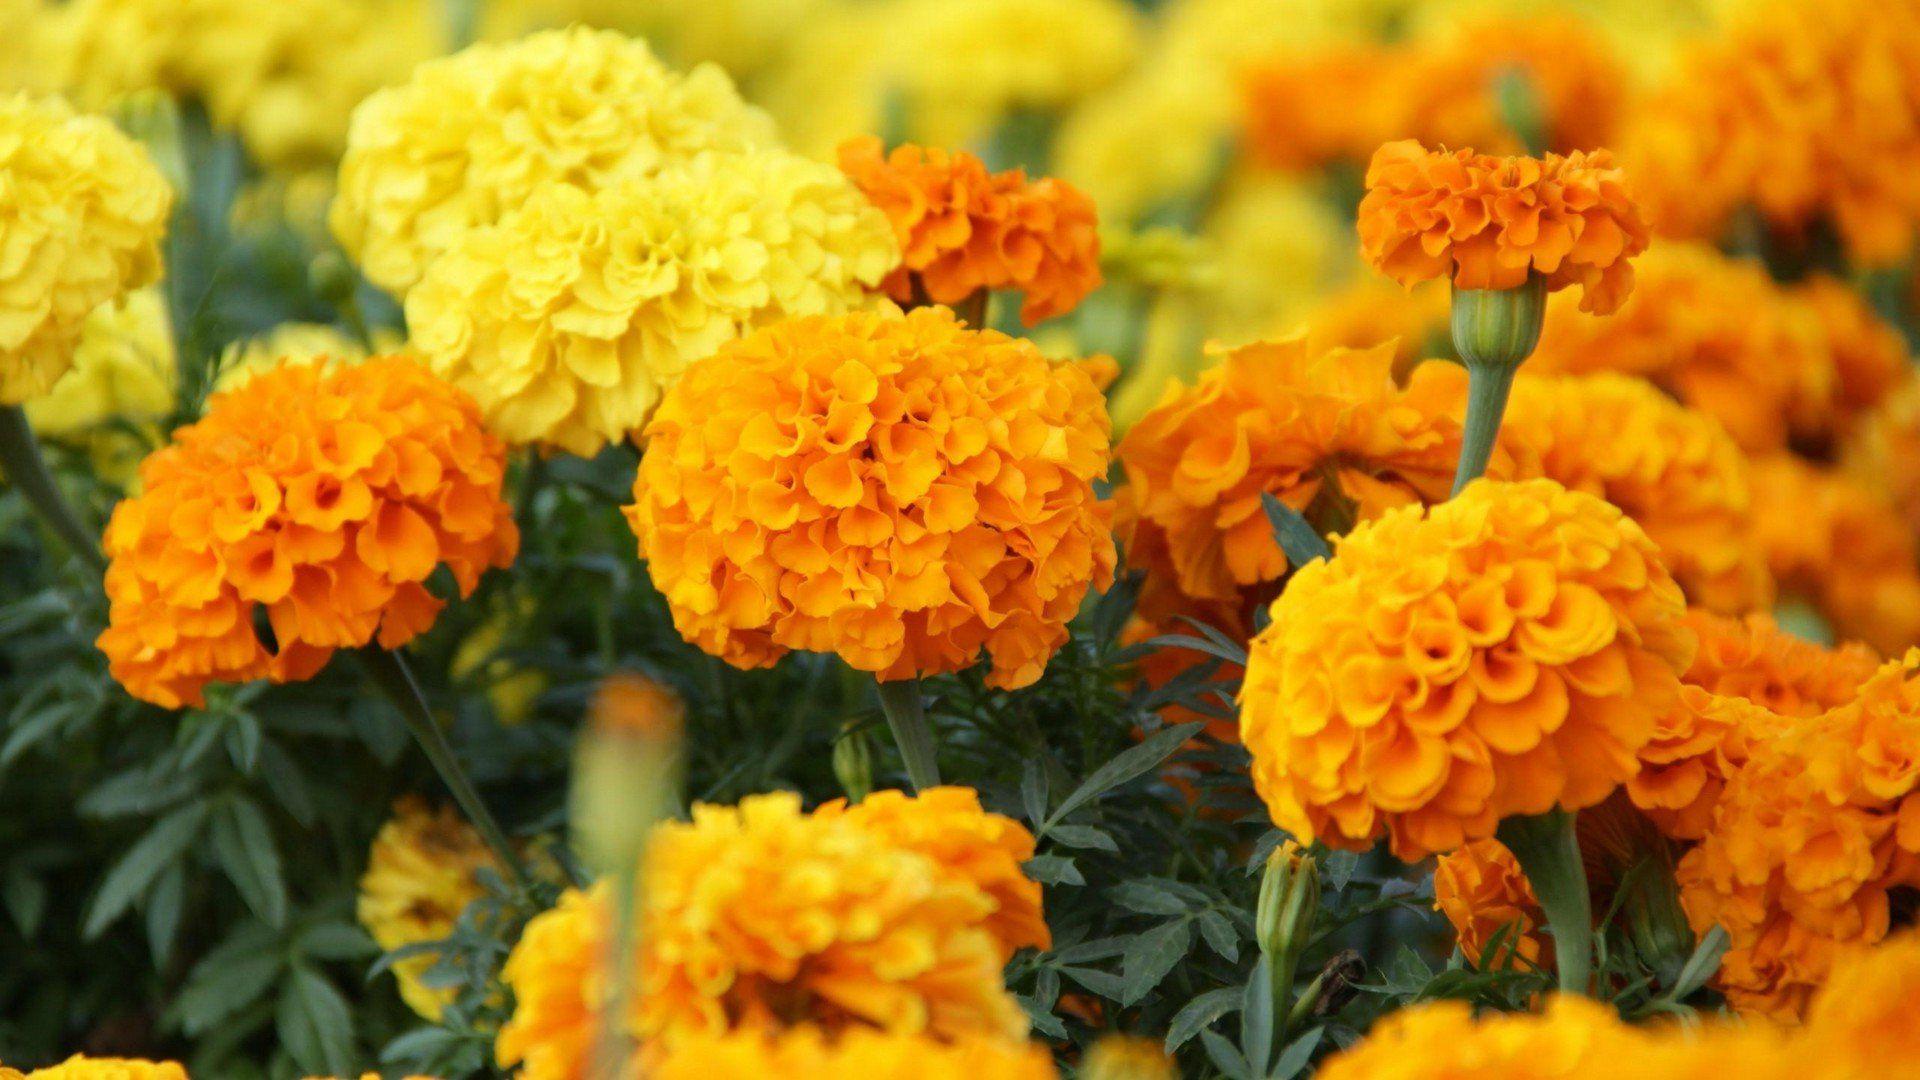 Marigold Flowers Image And Wallpaper